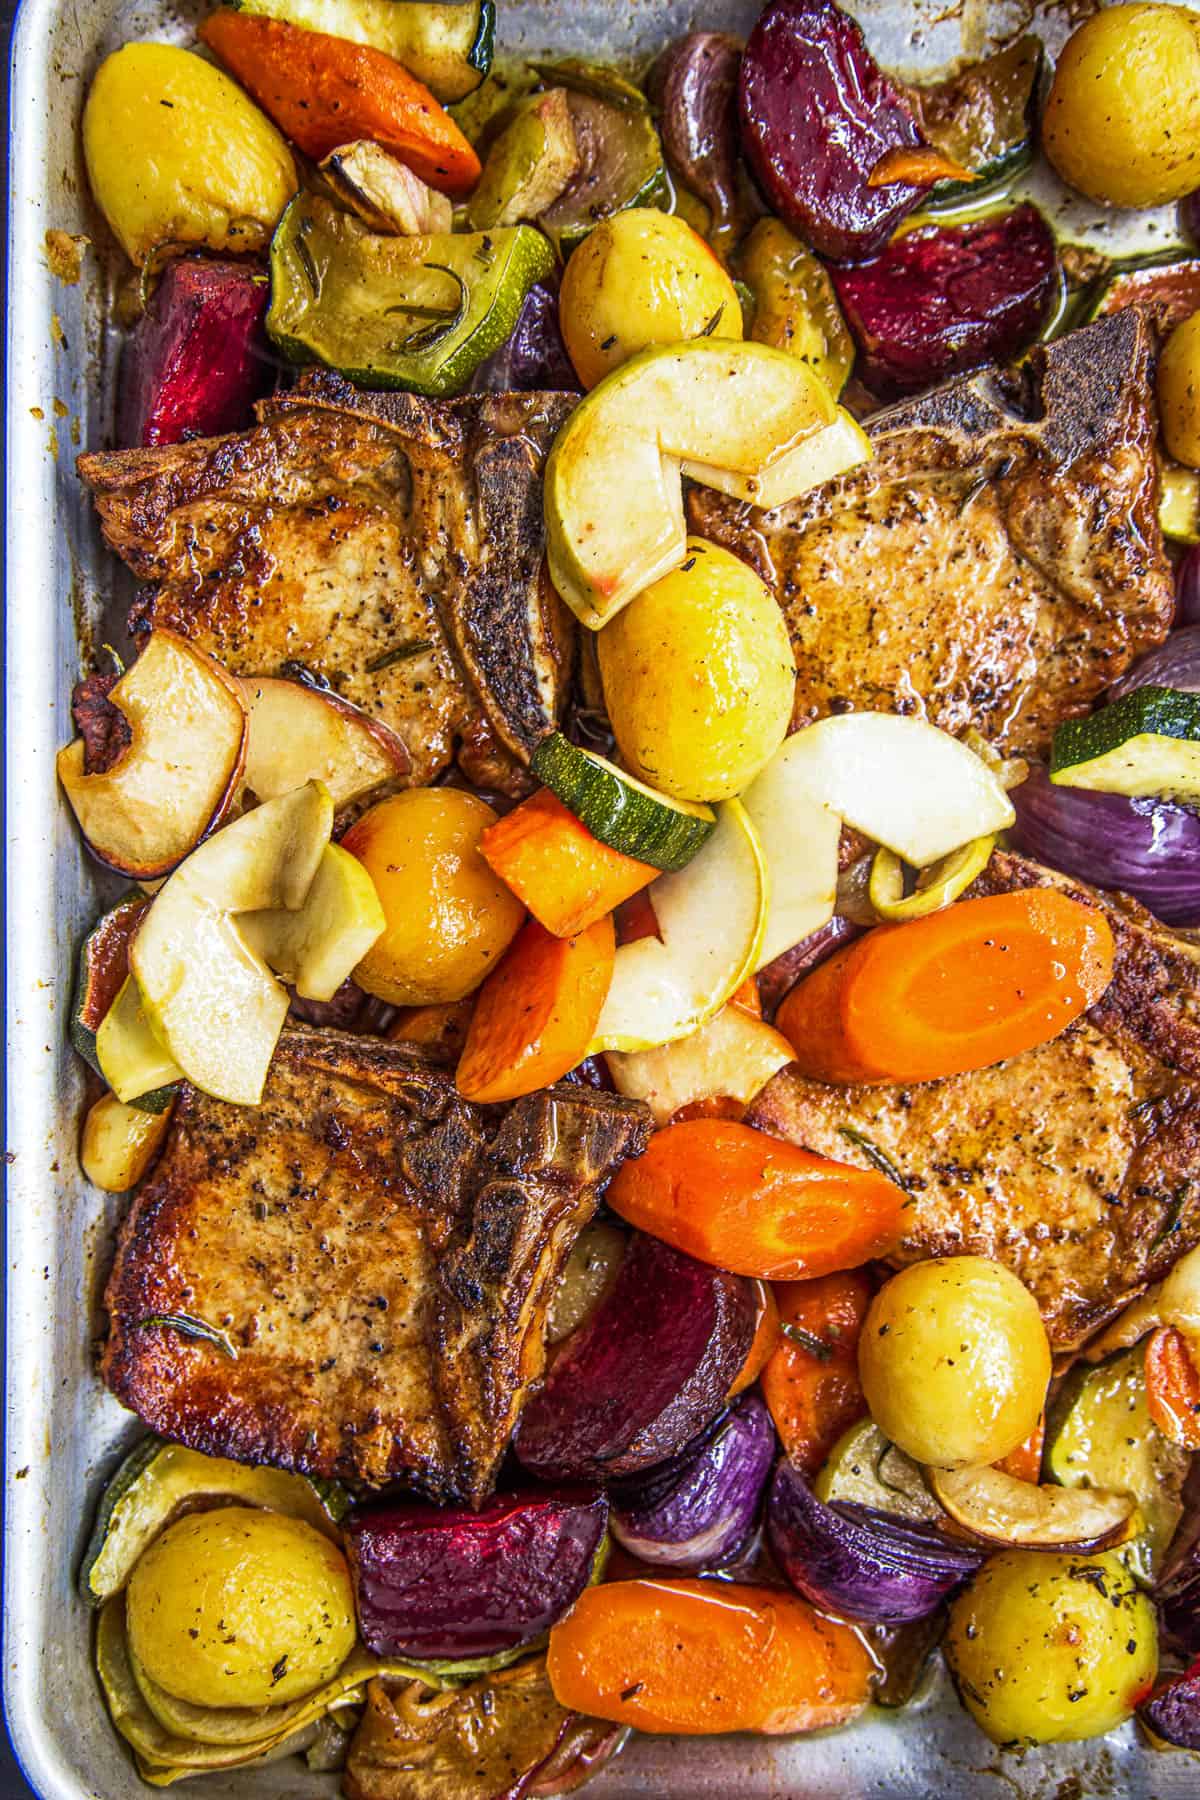 A close-up overhead shot of the baking dish with pork chops, apples, and vegetables cooked with apple juice and rosemary.